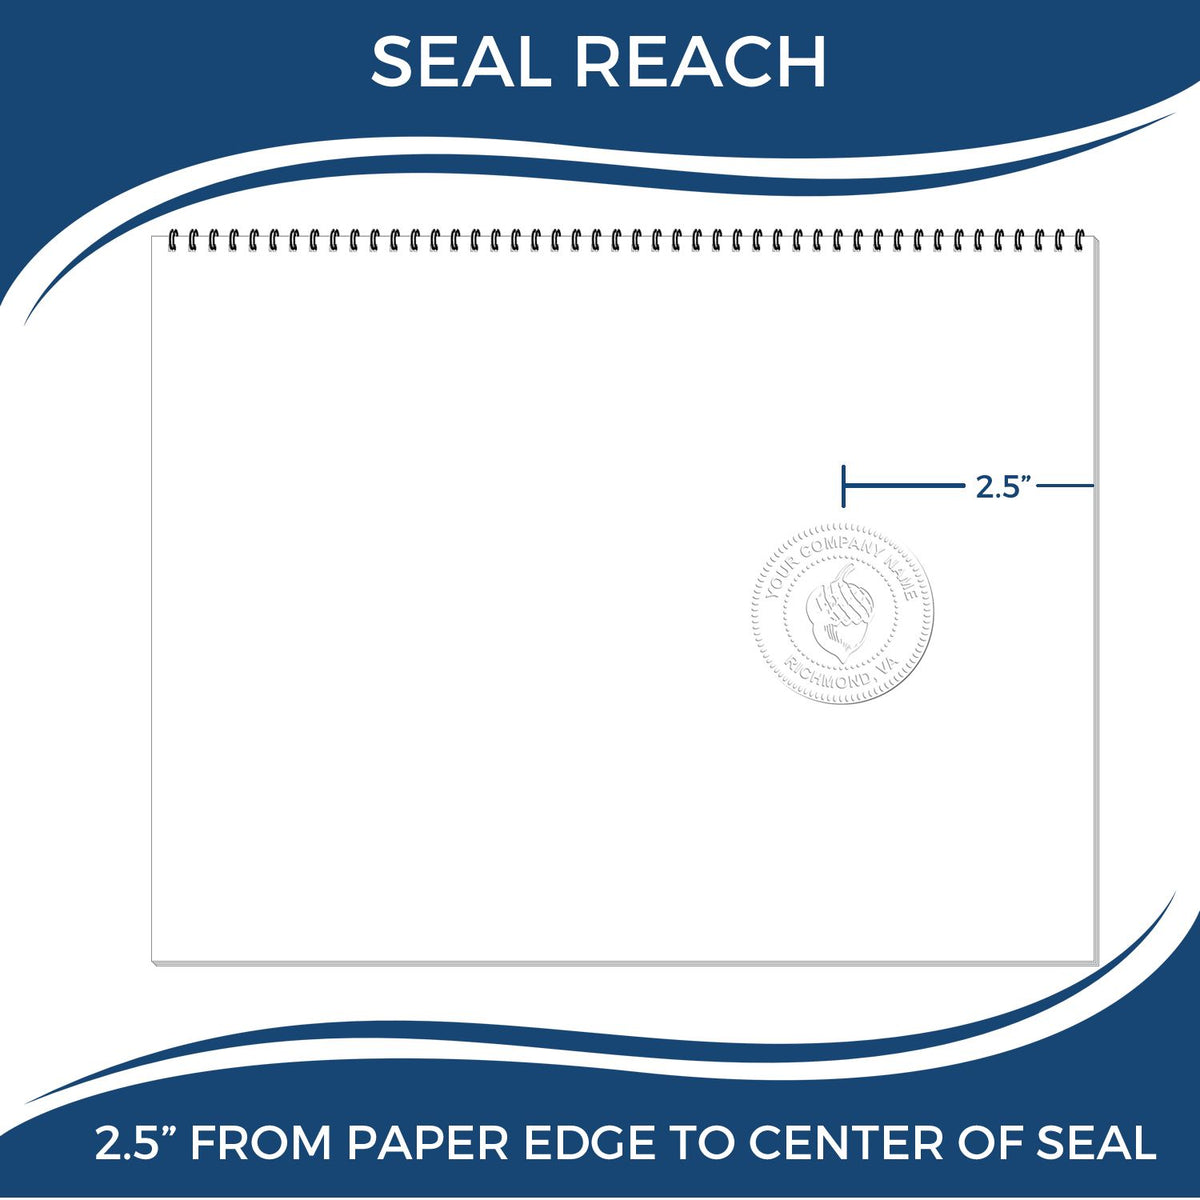 An infographic showing the seal reach which is represented by a ruler and a miniature seal image of the Long Reach South Carolina Geology Seal